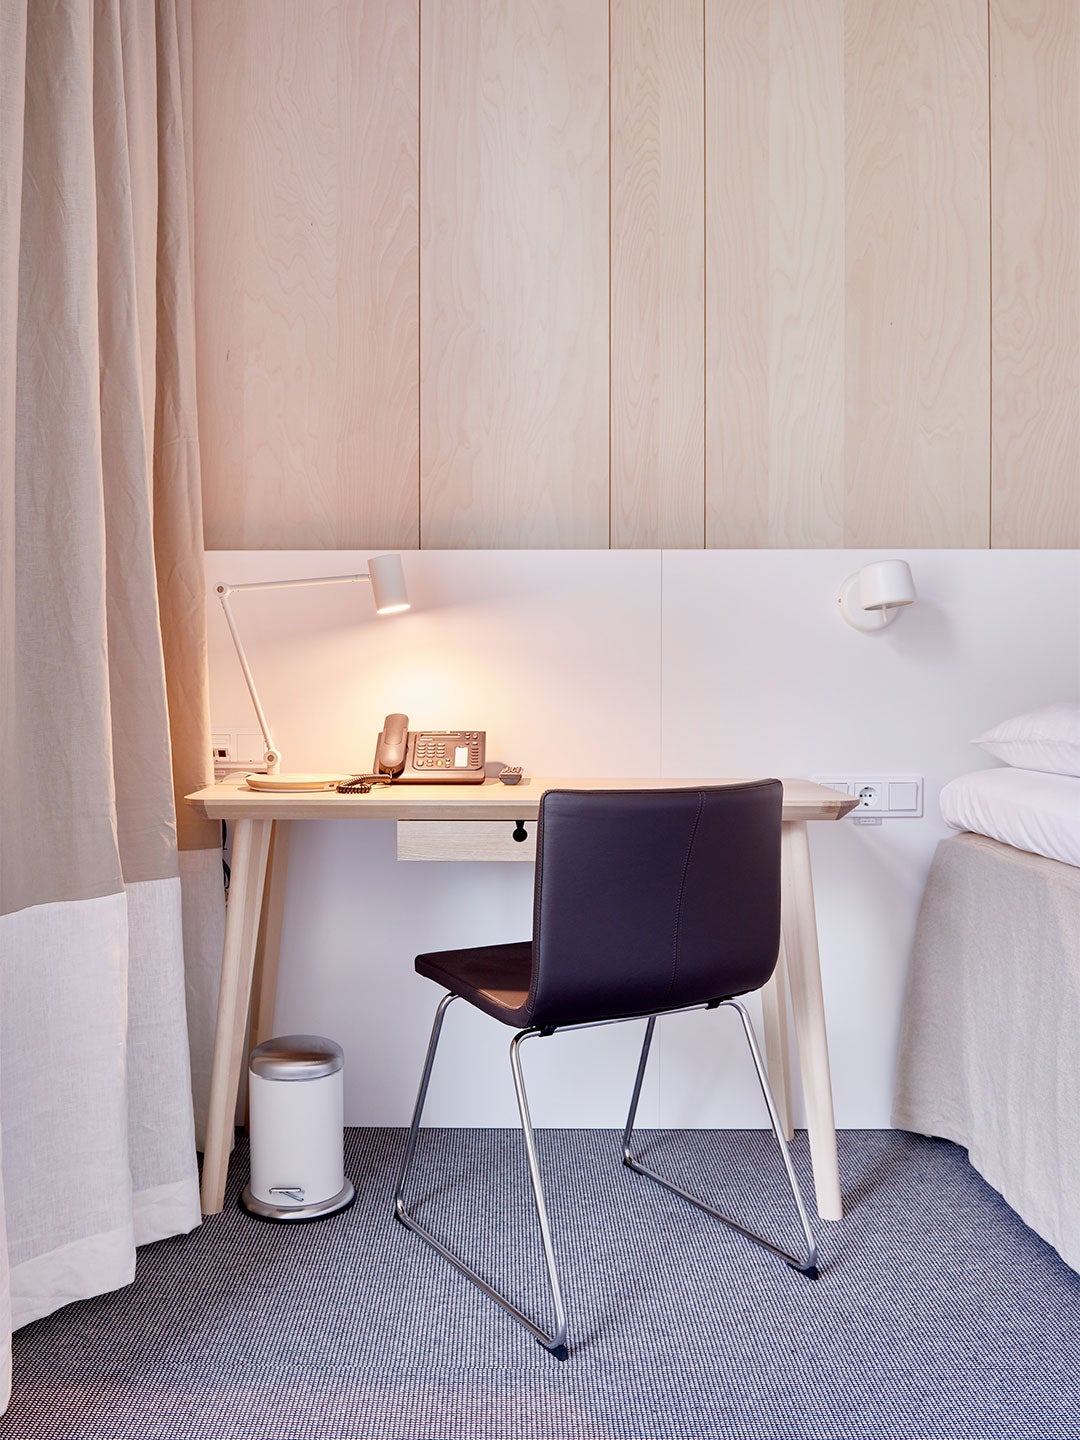 IKEA Hotell room with desk